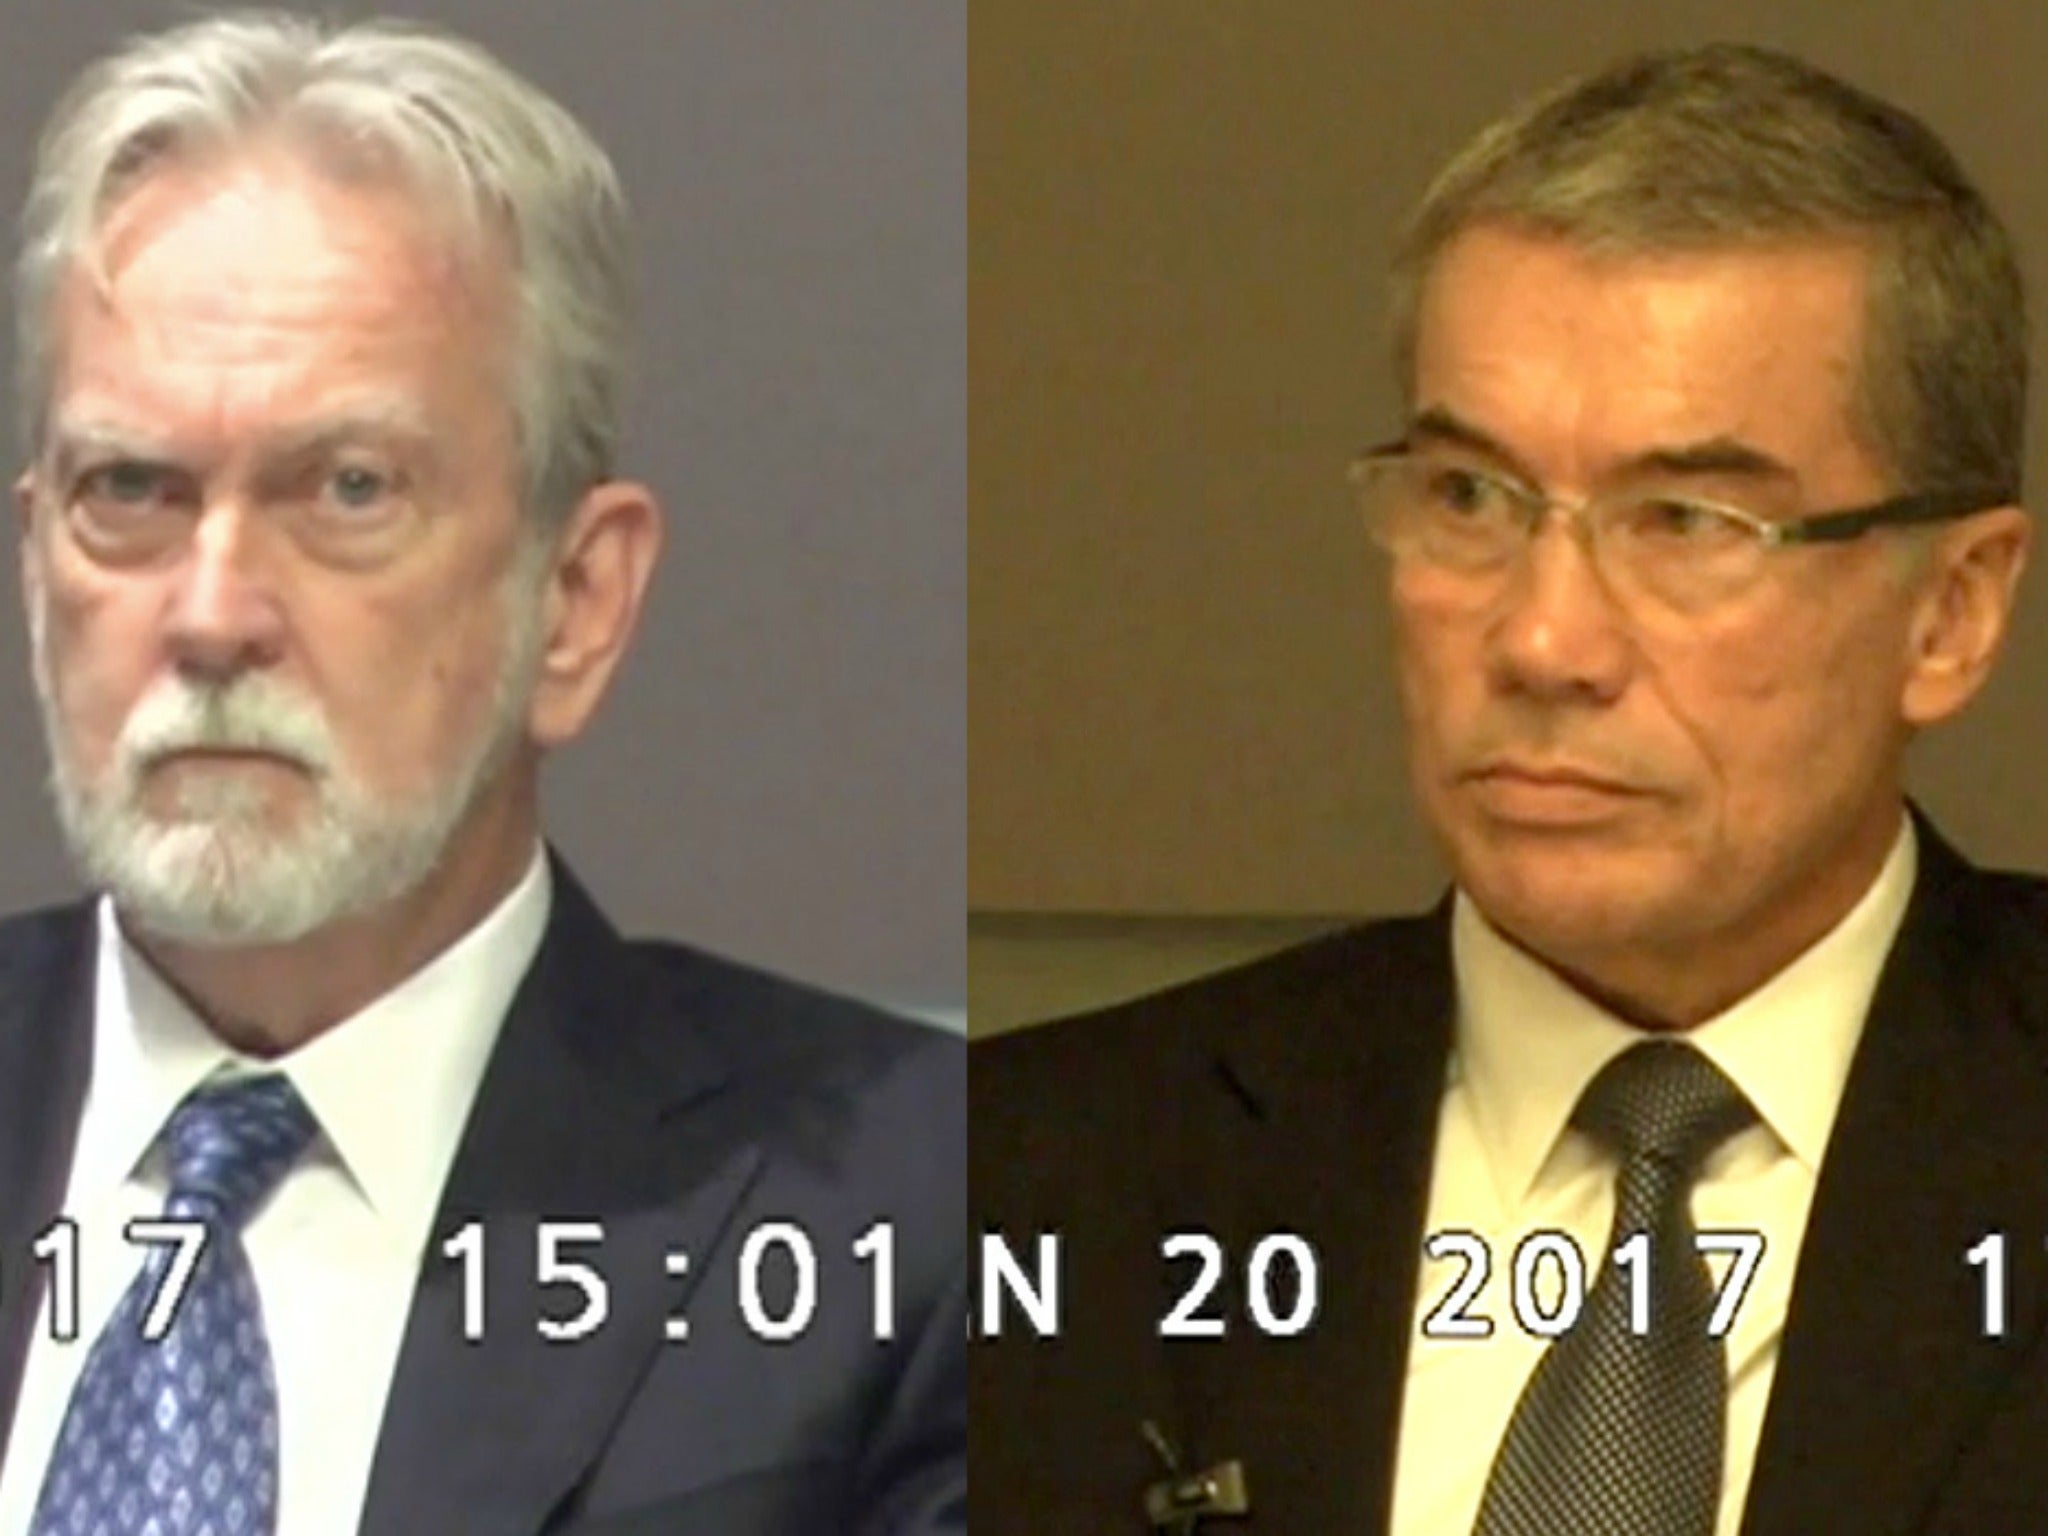 James Mitchell (left) and Bruce Jessen (right) are accused in a lawsuit of being the designers of the CIA's interrogation programme